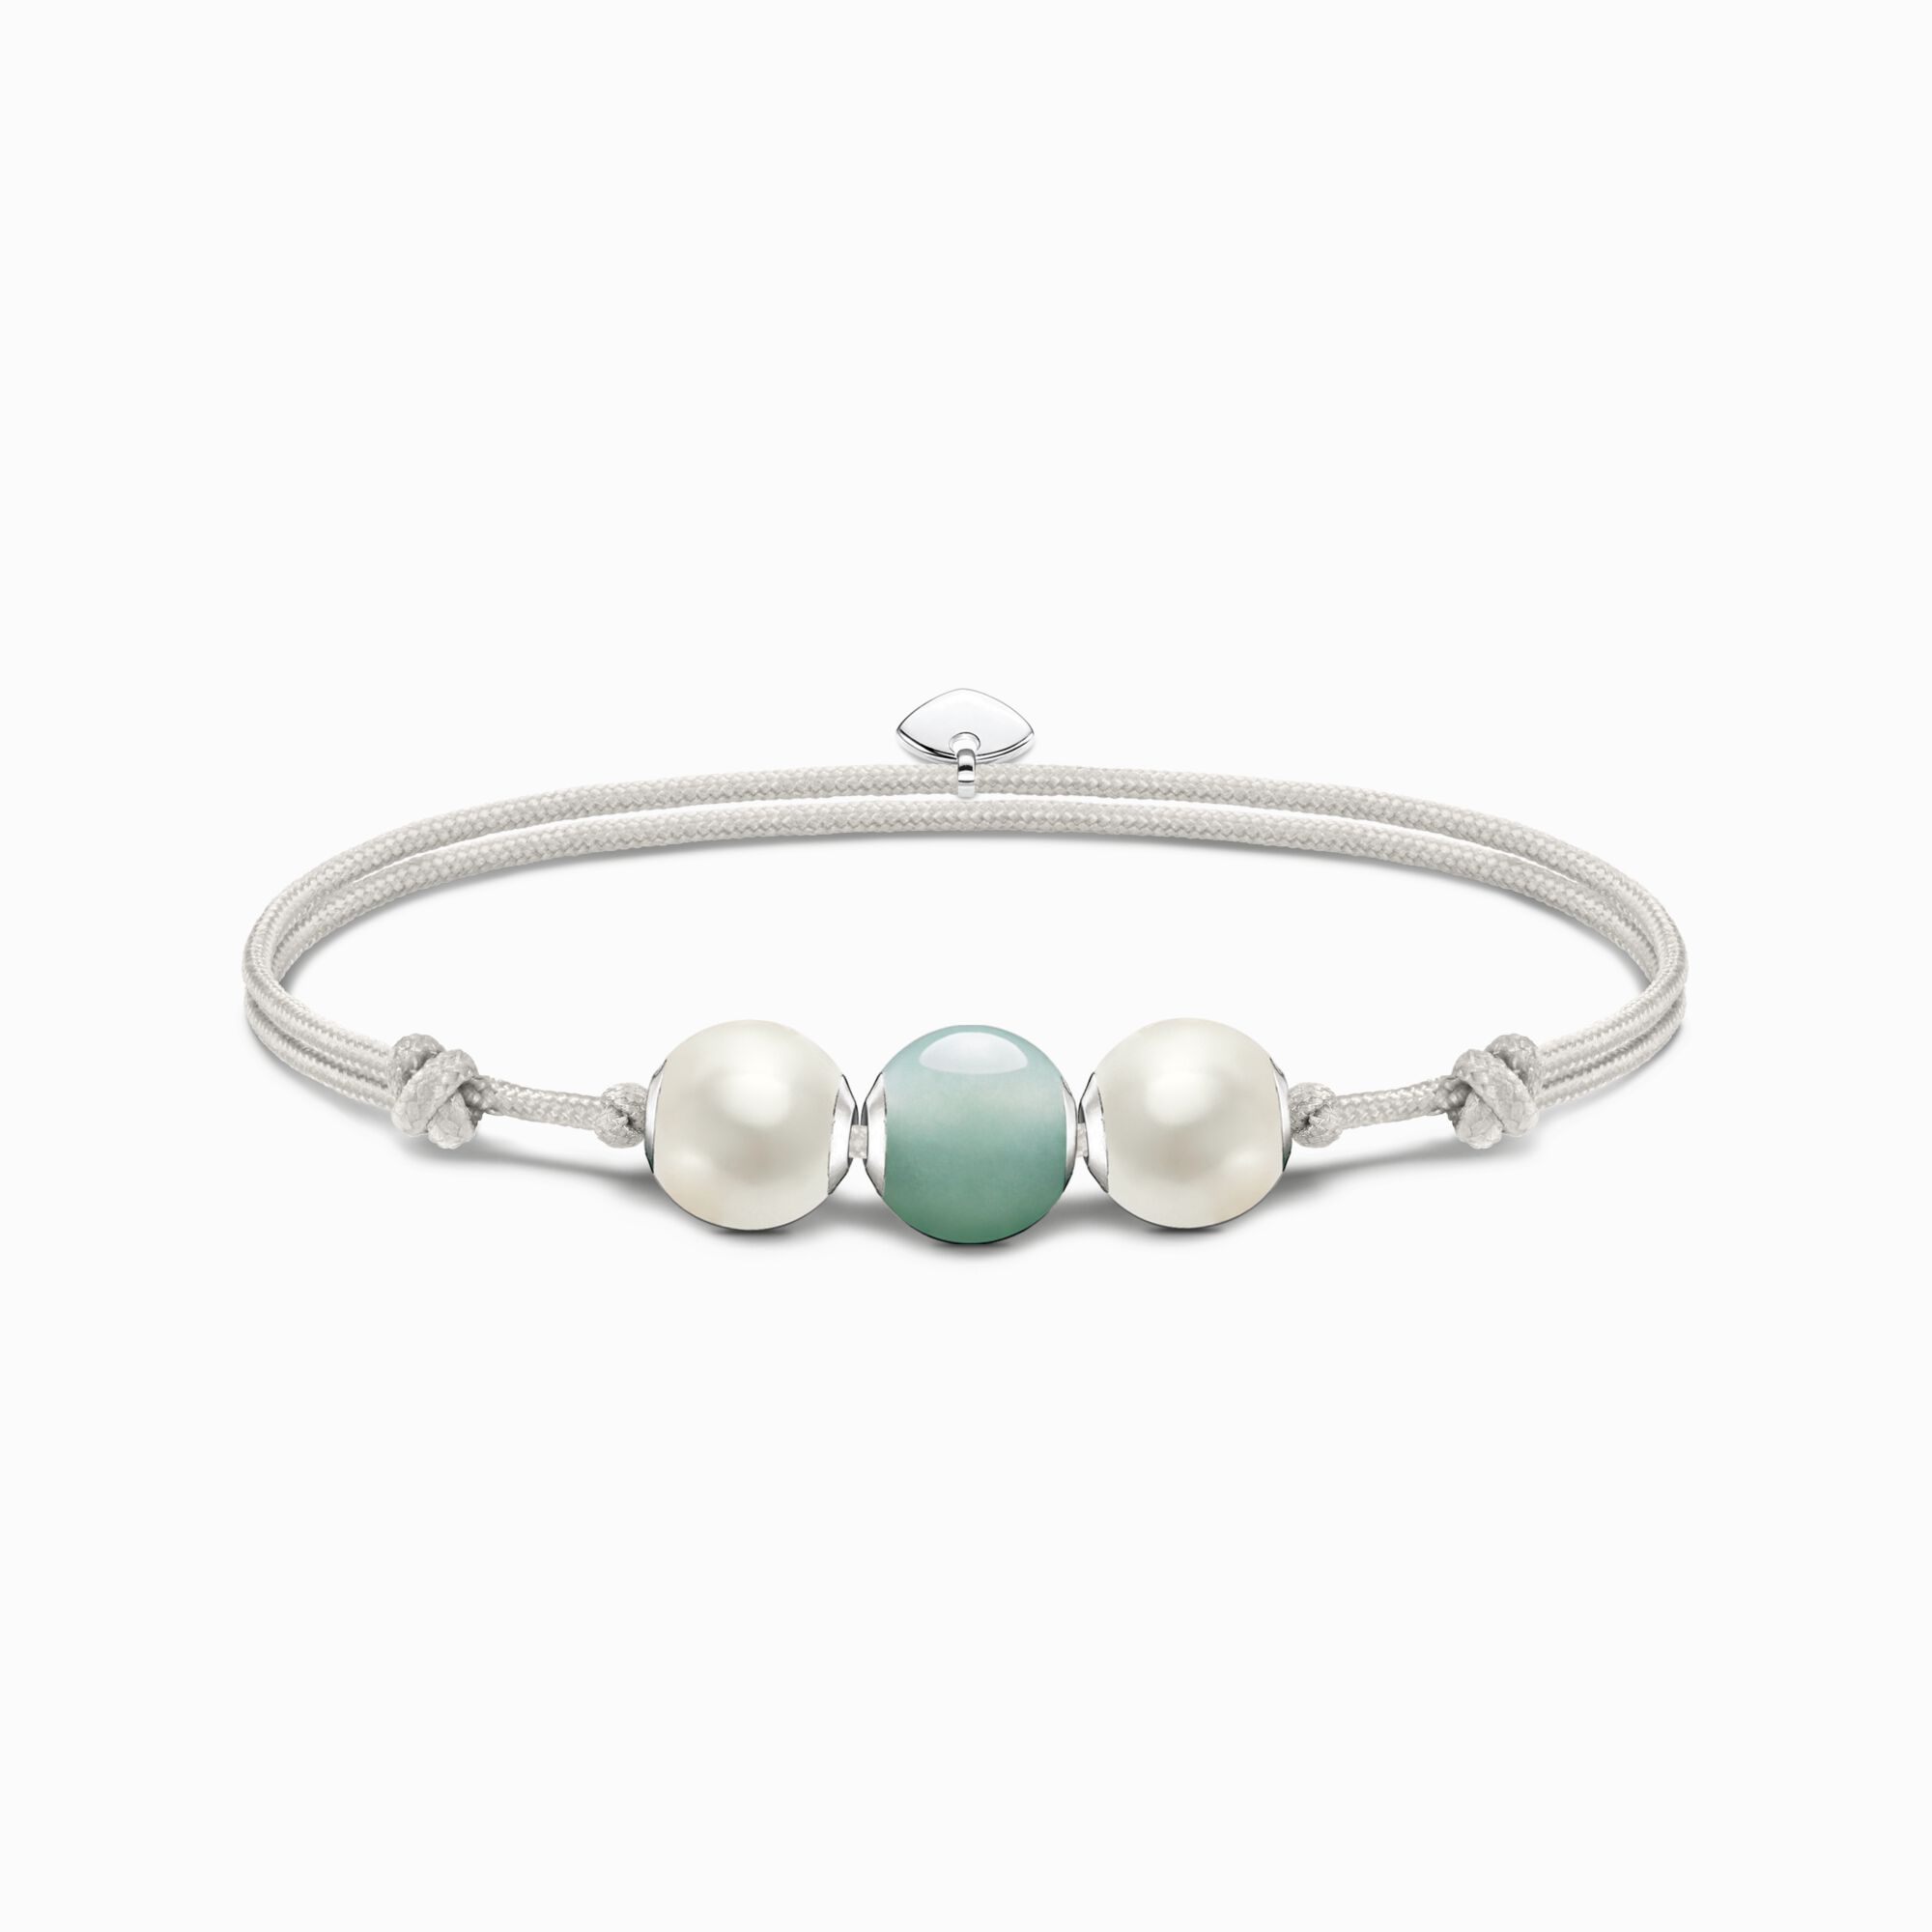 Bracelet Karma Secret with green aventurine Bead and white freshwater pearls from the Karma Beads collection in the THOMAS SABO online store